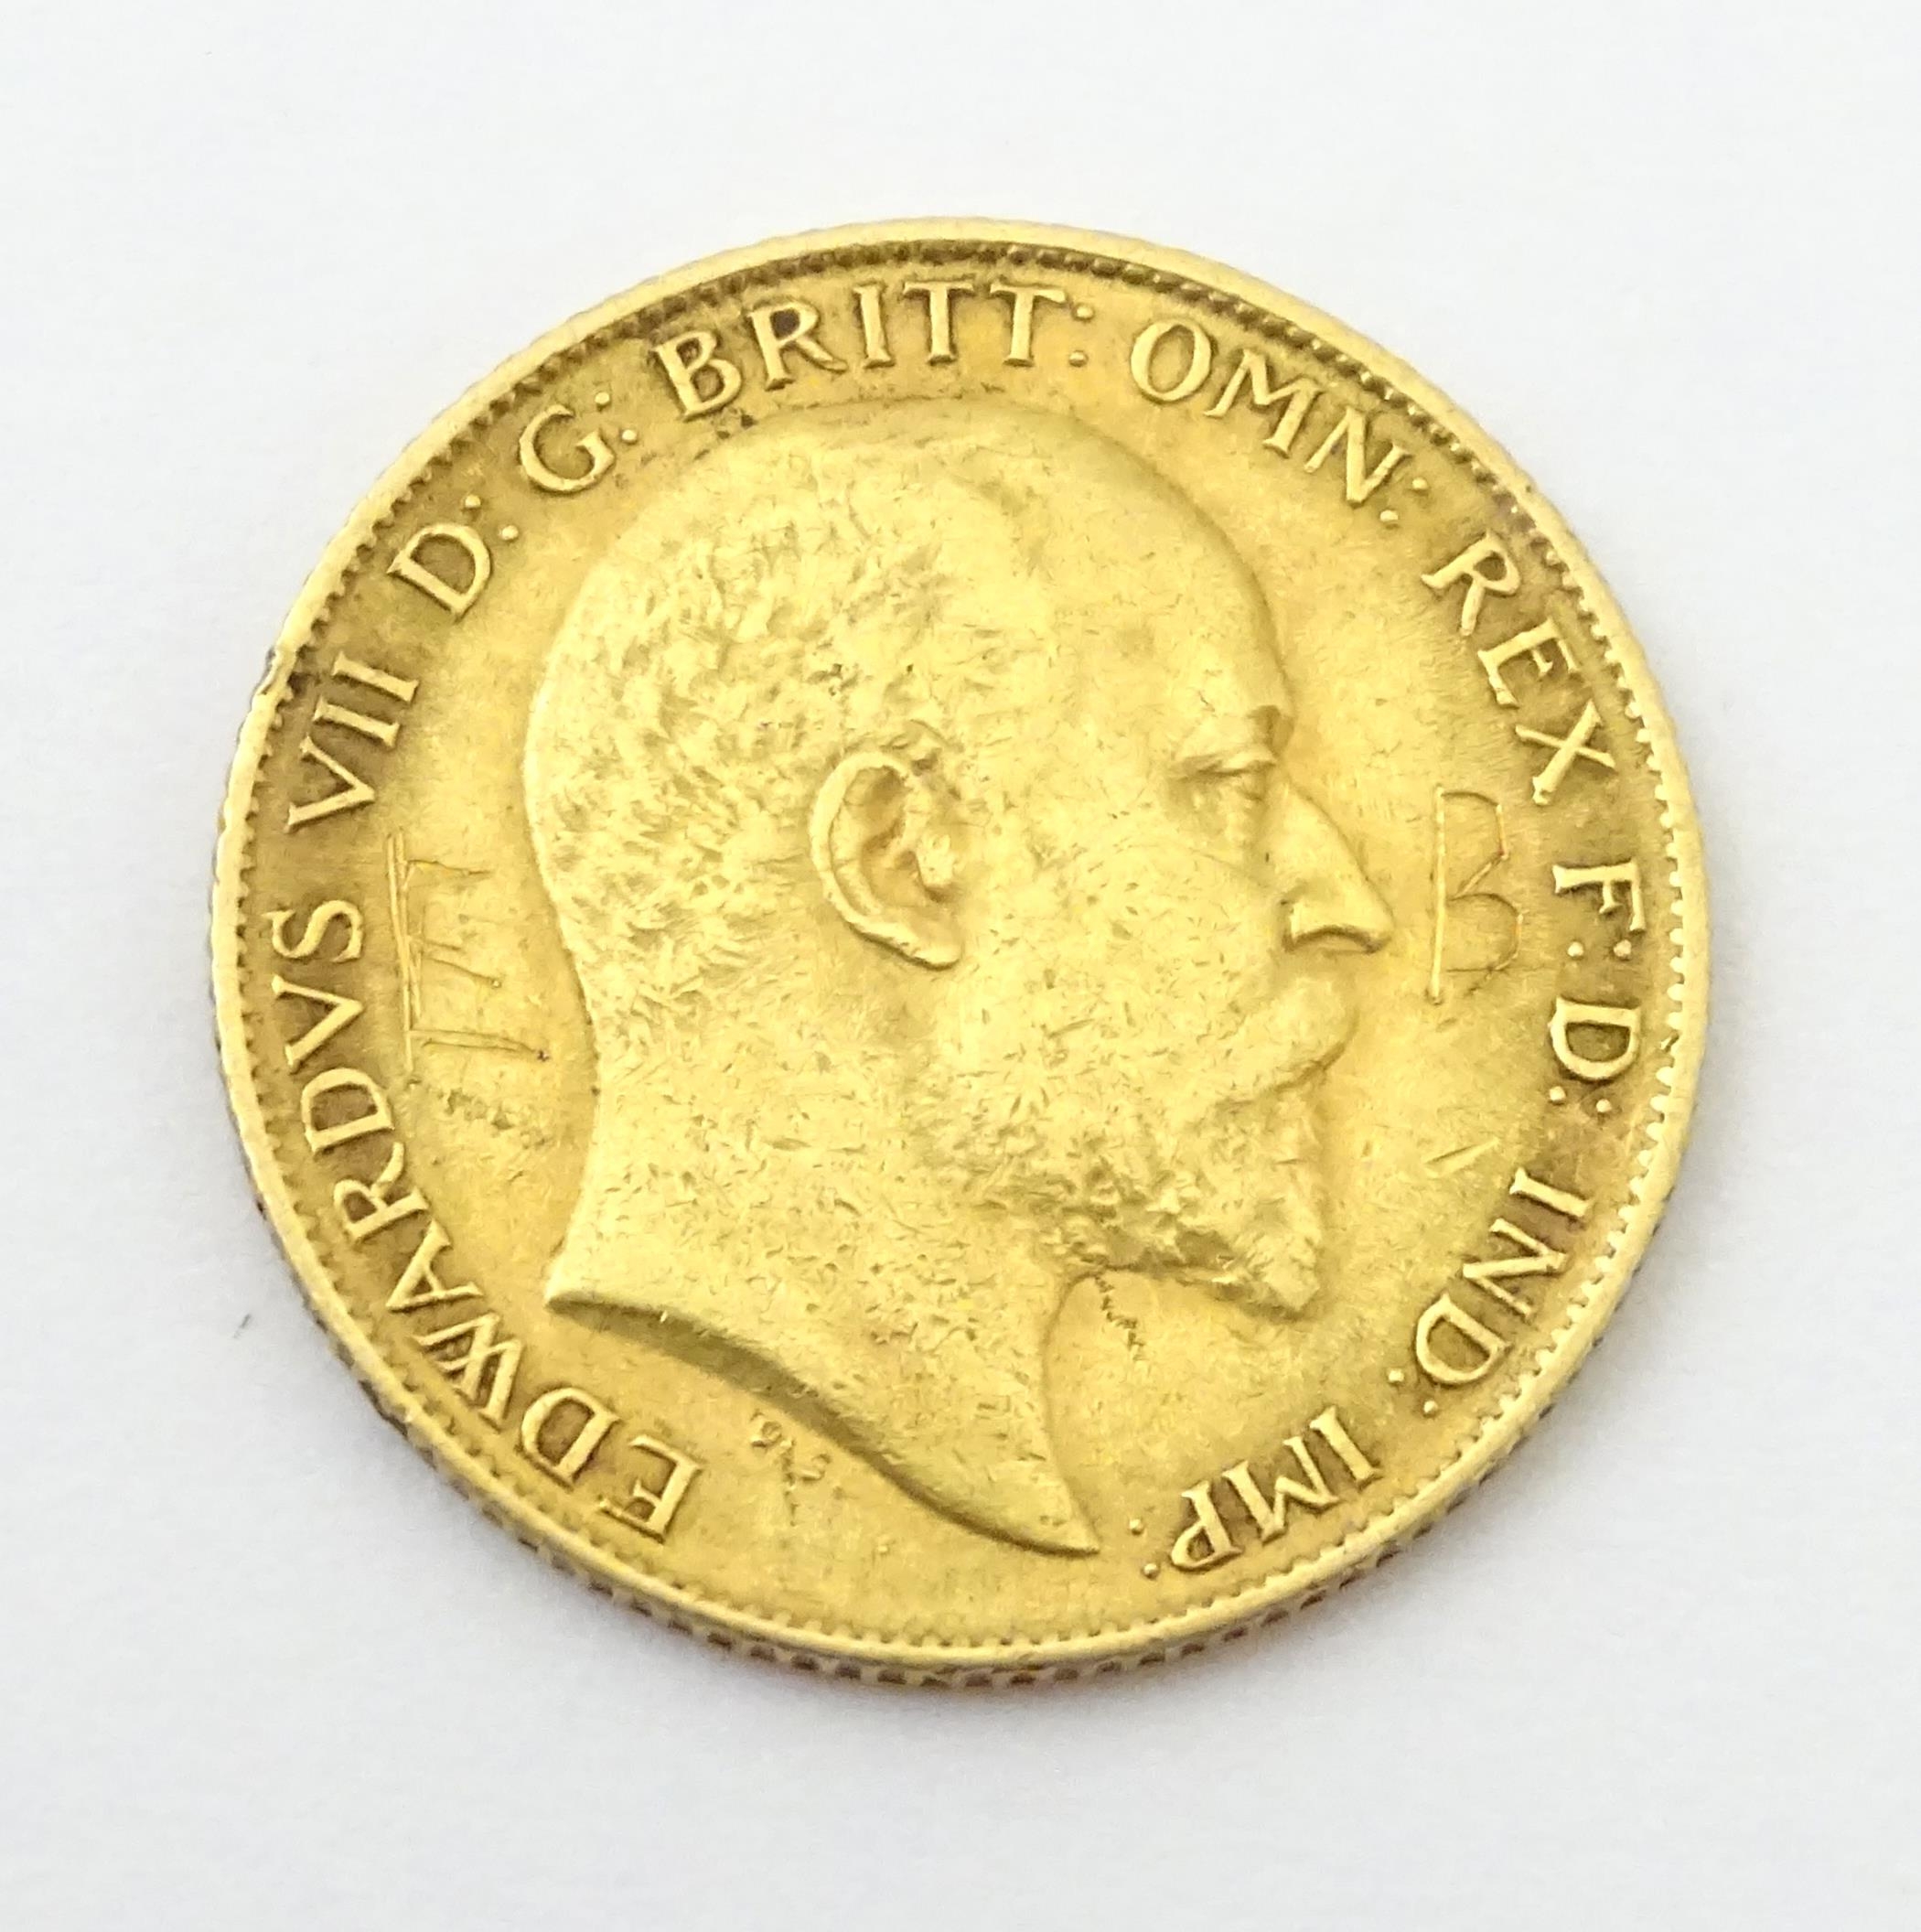 Coin: An Edward VII 1909 gold half sovereign (3.9g) Please Note - we do not make reference to the